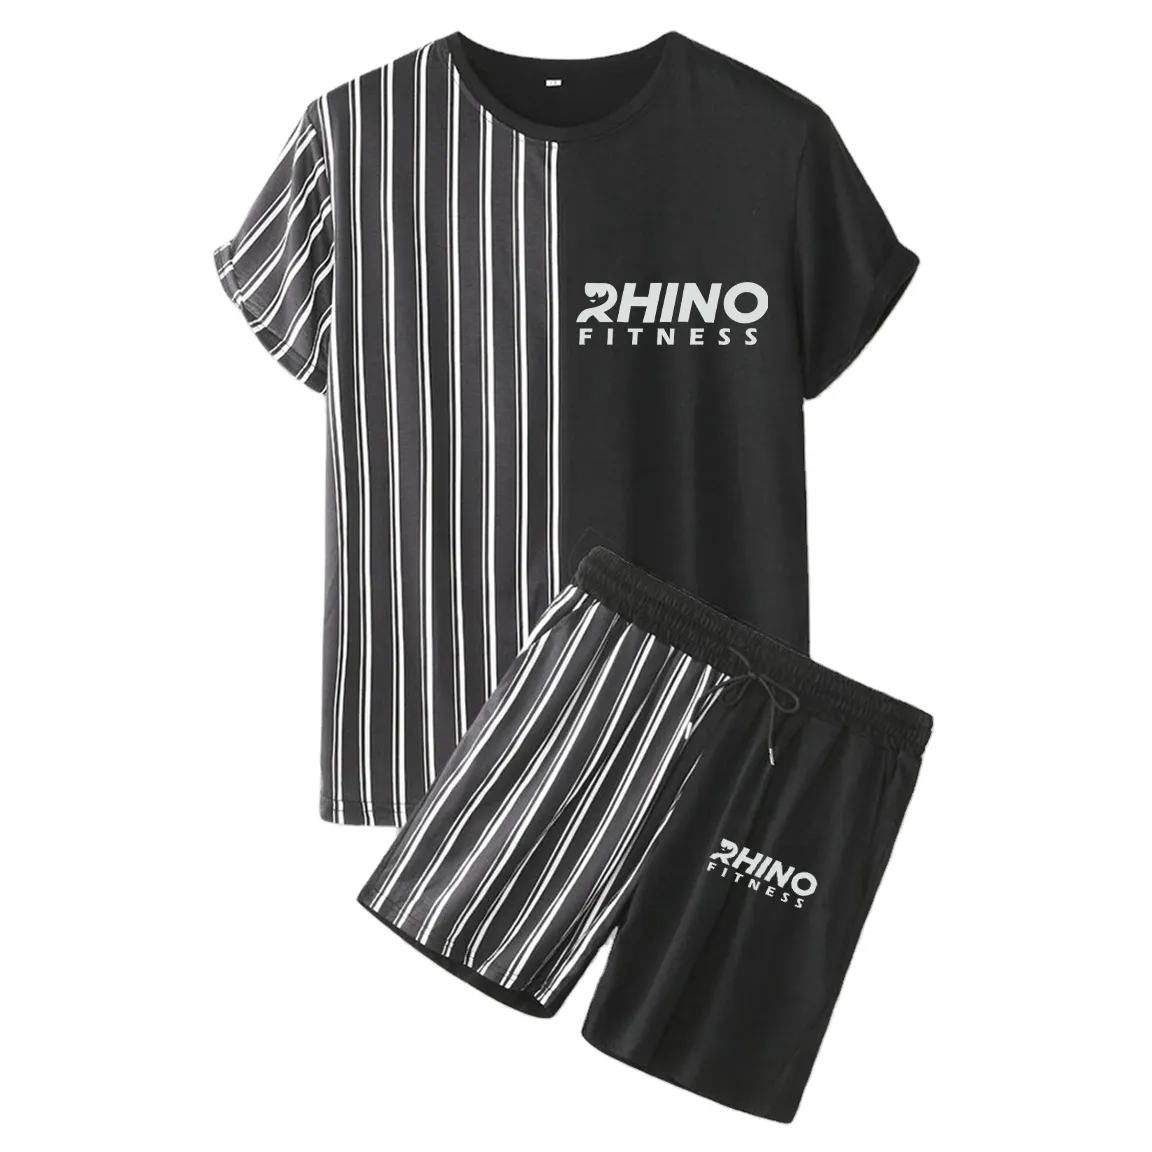 Men's New Lining Style Short Set Suit In Unique Black Color Short Set Made By Rhino Sports Short Set For Men's